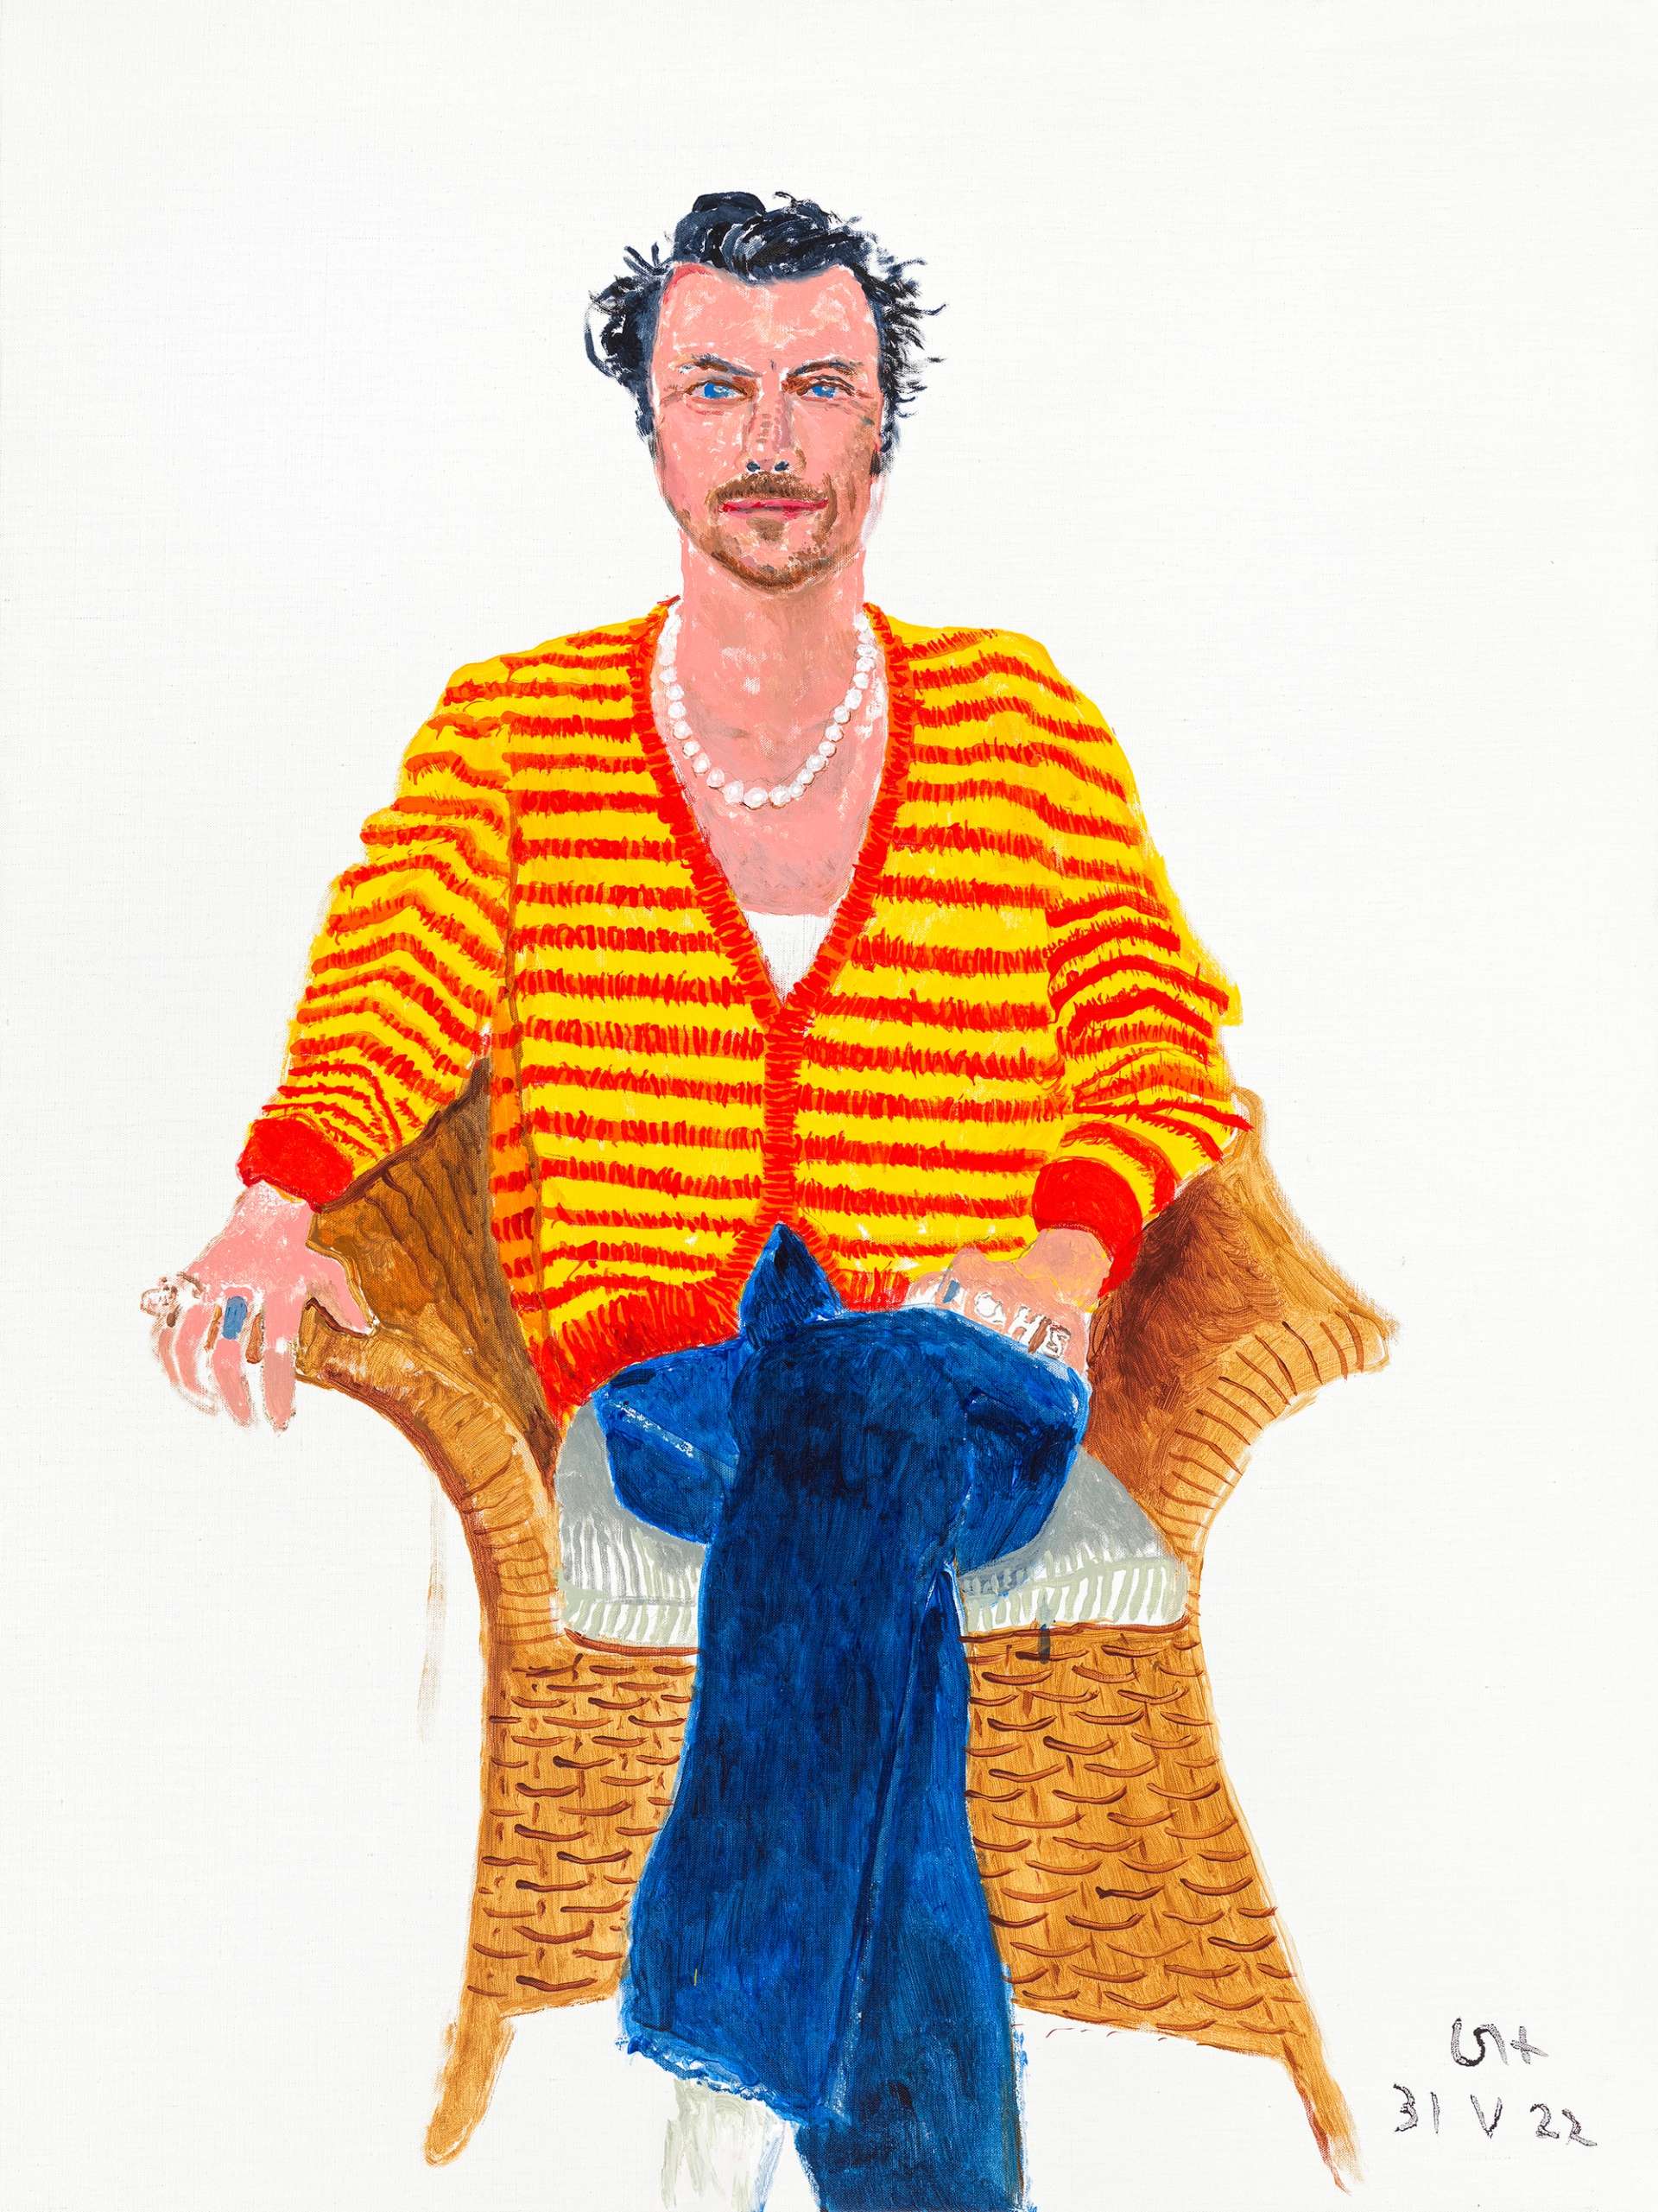 An acrylic on canvas portrait of pop star Harry Styles by David Hockney, depicting the artist in a bright yellow and orange cardigan, sitting on an armchair and looking directly out to the viewer.